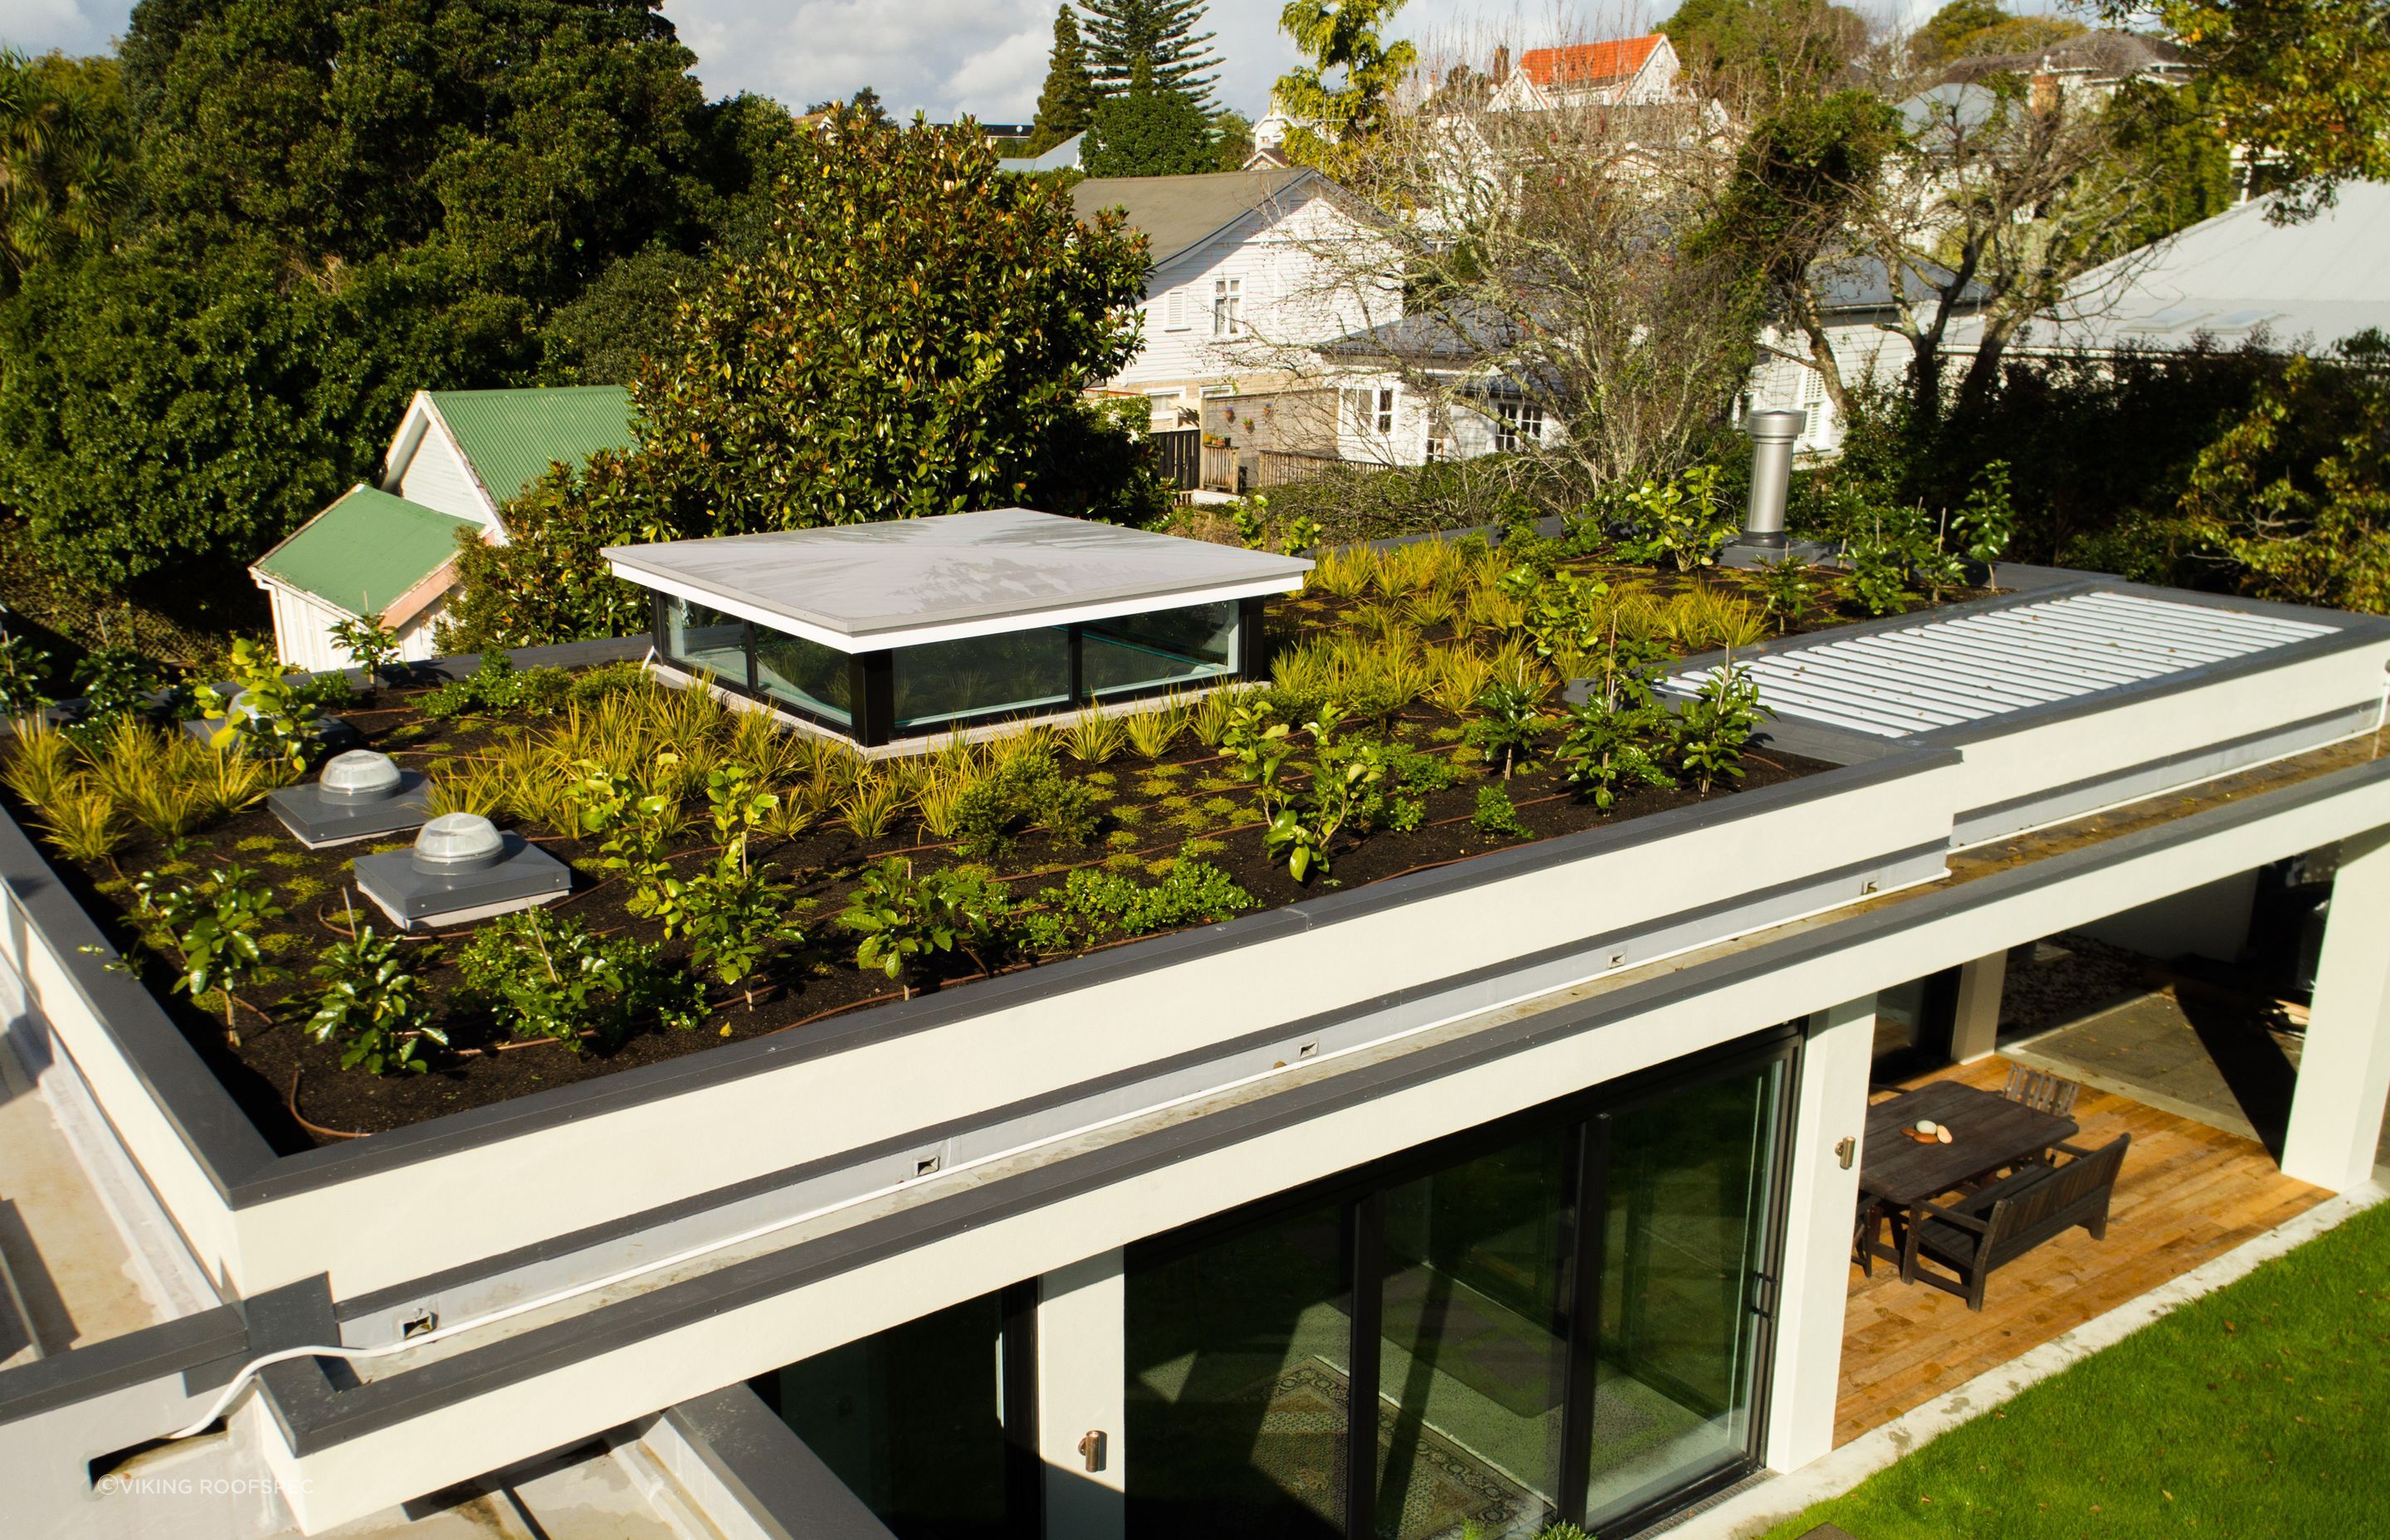 The Viking Roof Garden system drastically transformed this extension's roof and the home's overall aesthetic.